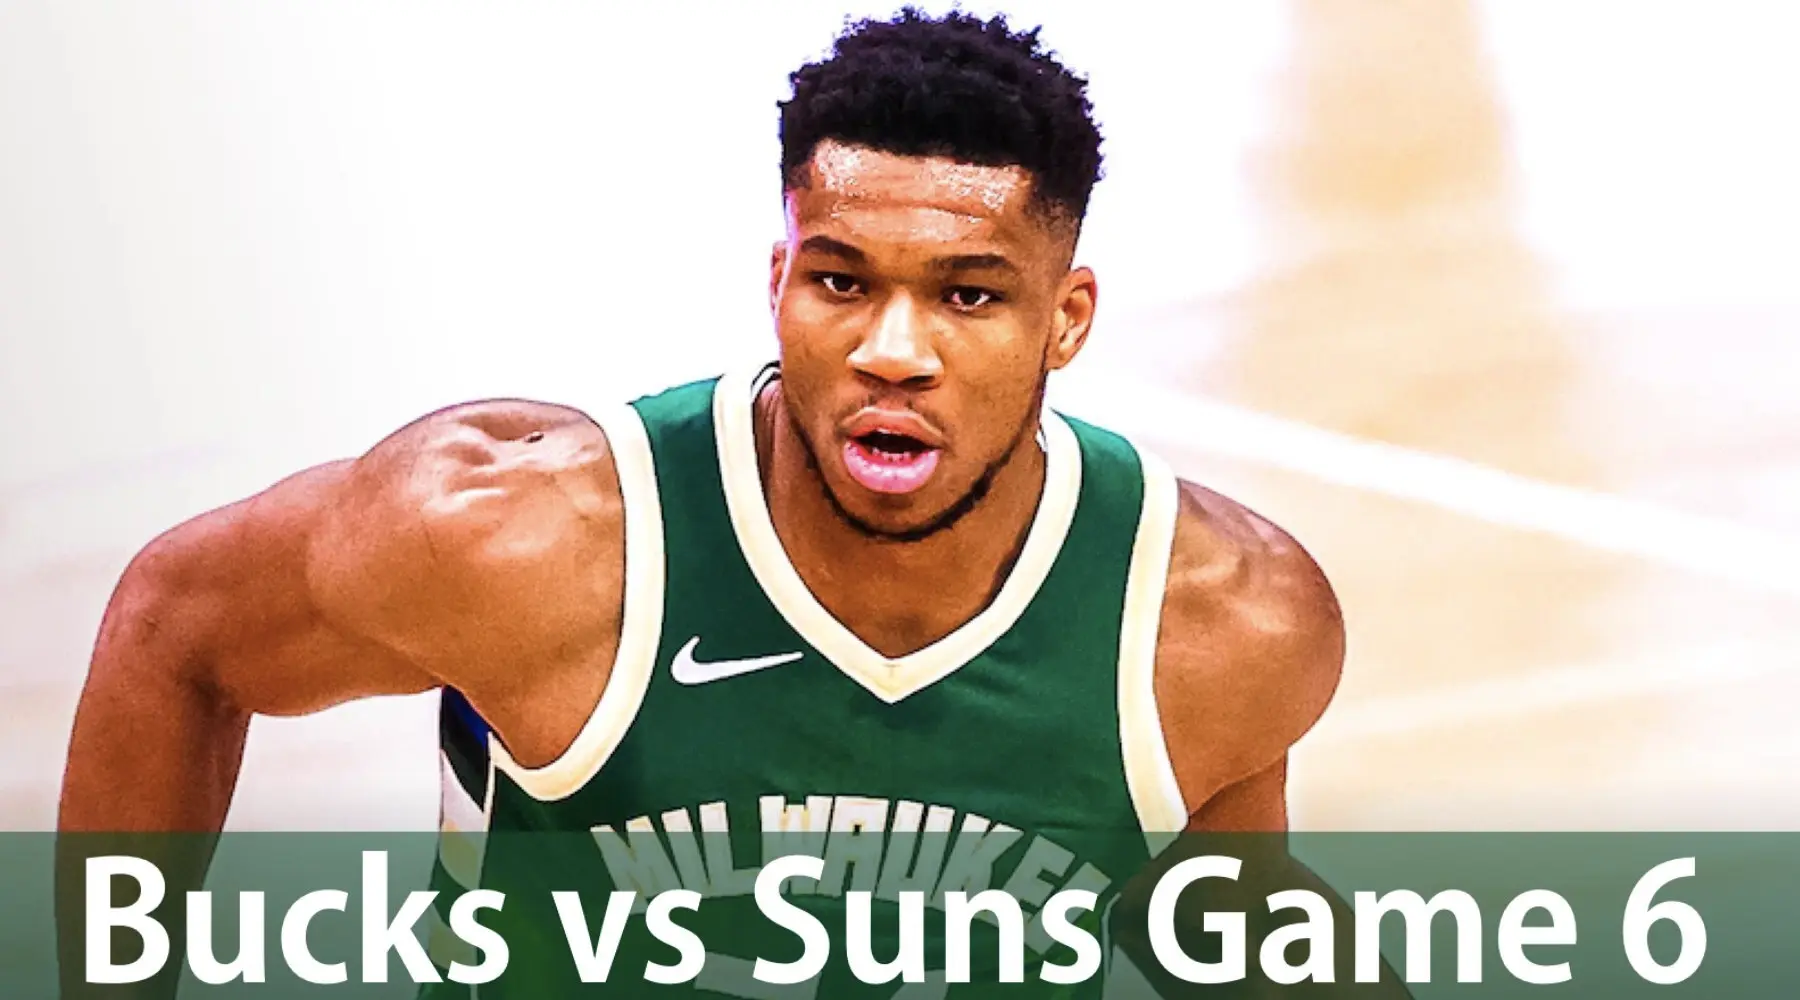 Watch Bucks vs Suns NBA Finals Game 6 live and free online